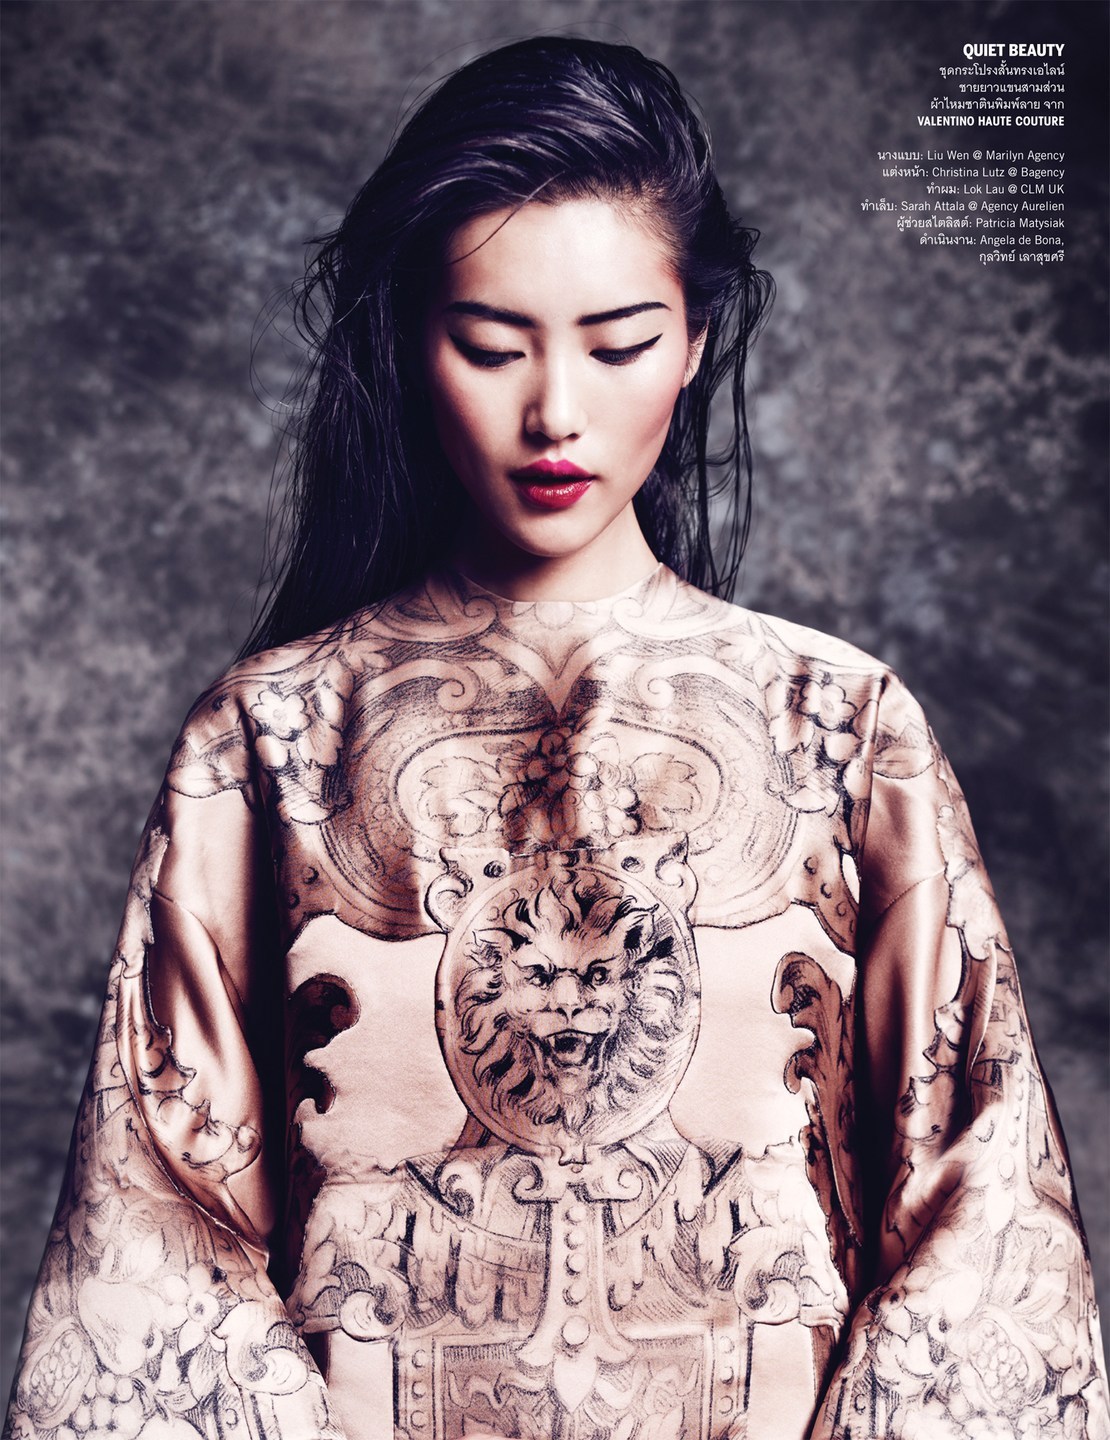 blissfully-chic:</p><br /><br /><br /> <p>Liu Wen for Vogue Thailand, October 2013 <br /><br /><br /><br /> 